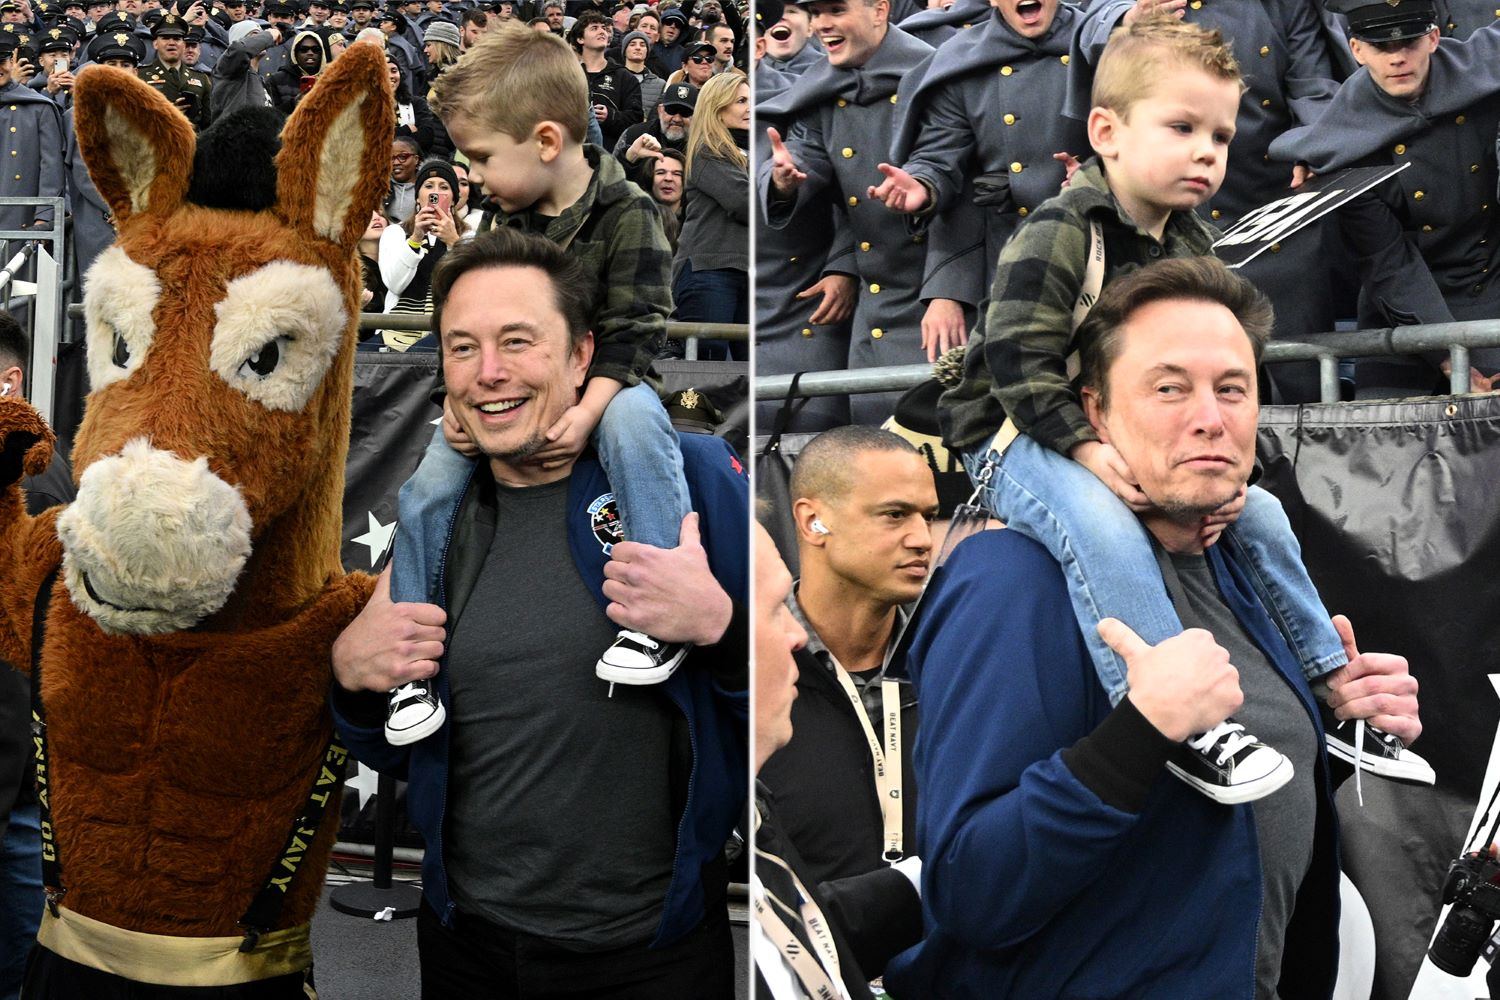 Elon Musk Takes Son To Army Navy Football Game